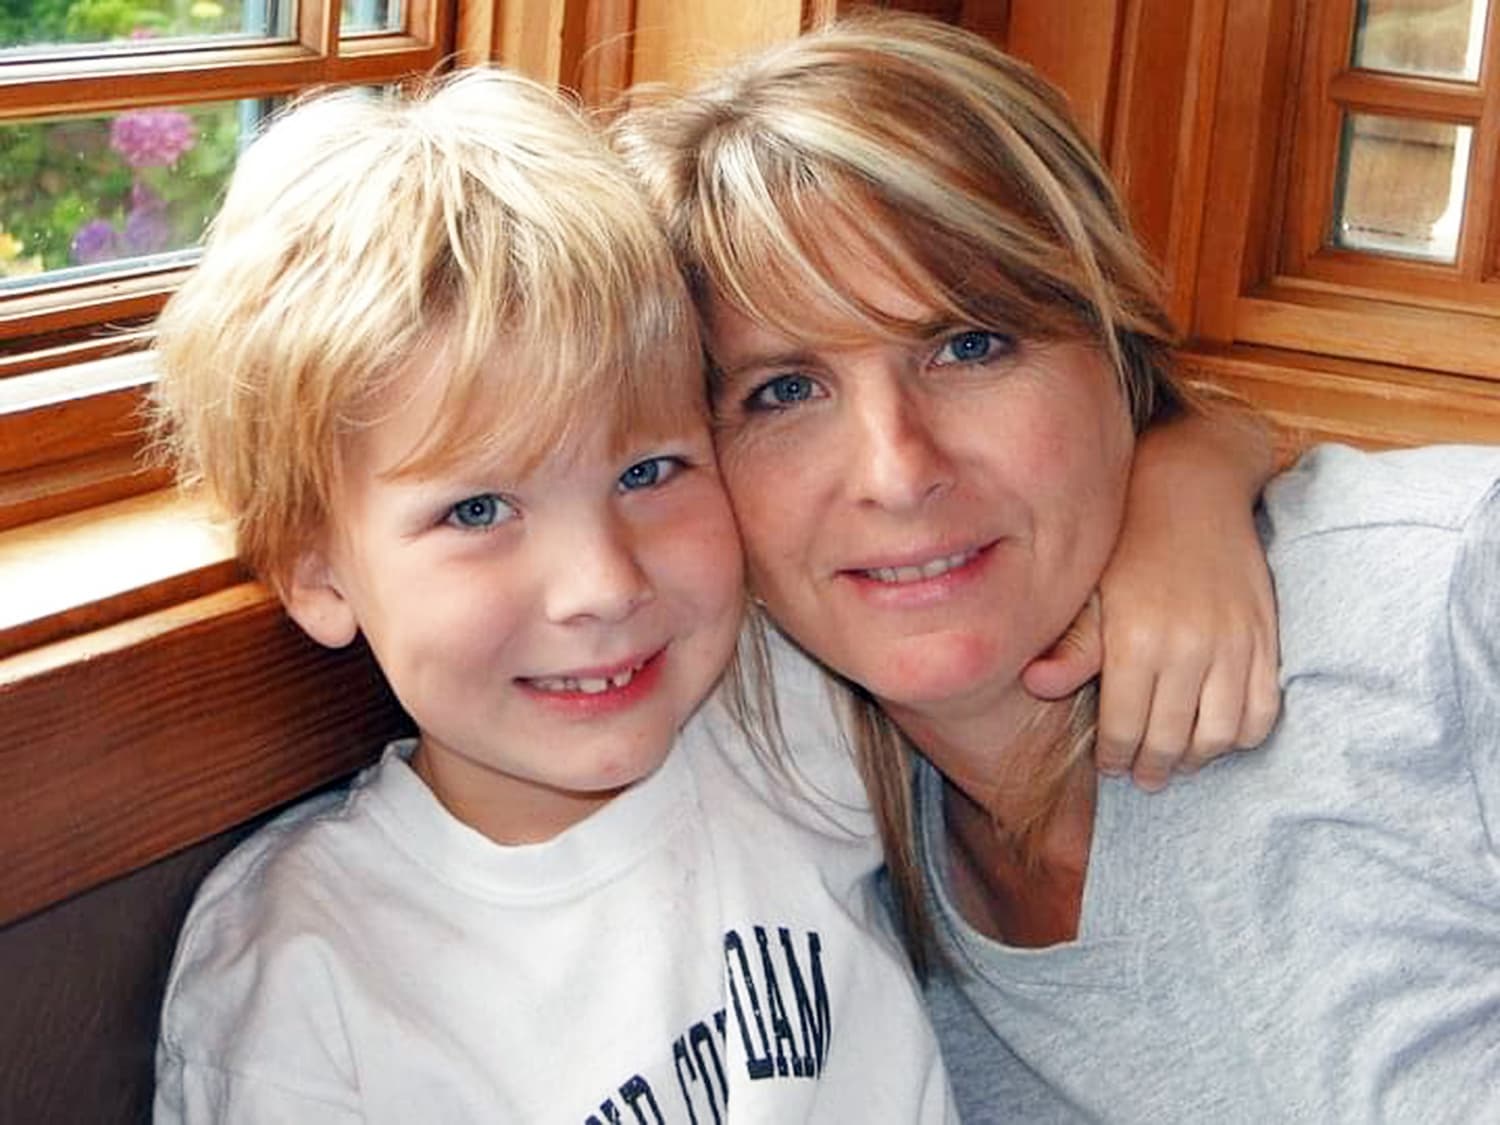 Mom's heart was shocked 44 times after cardiac arrest: 'Don't take a day for granted'